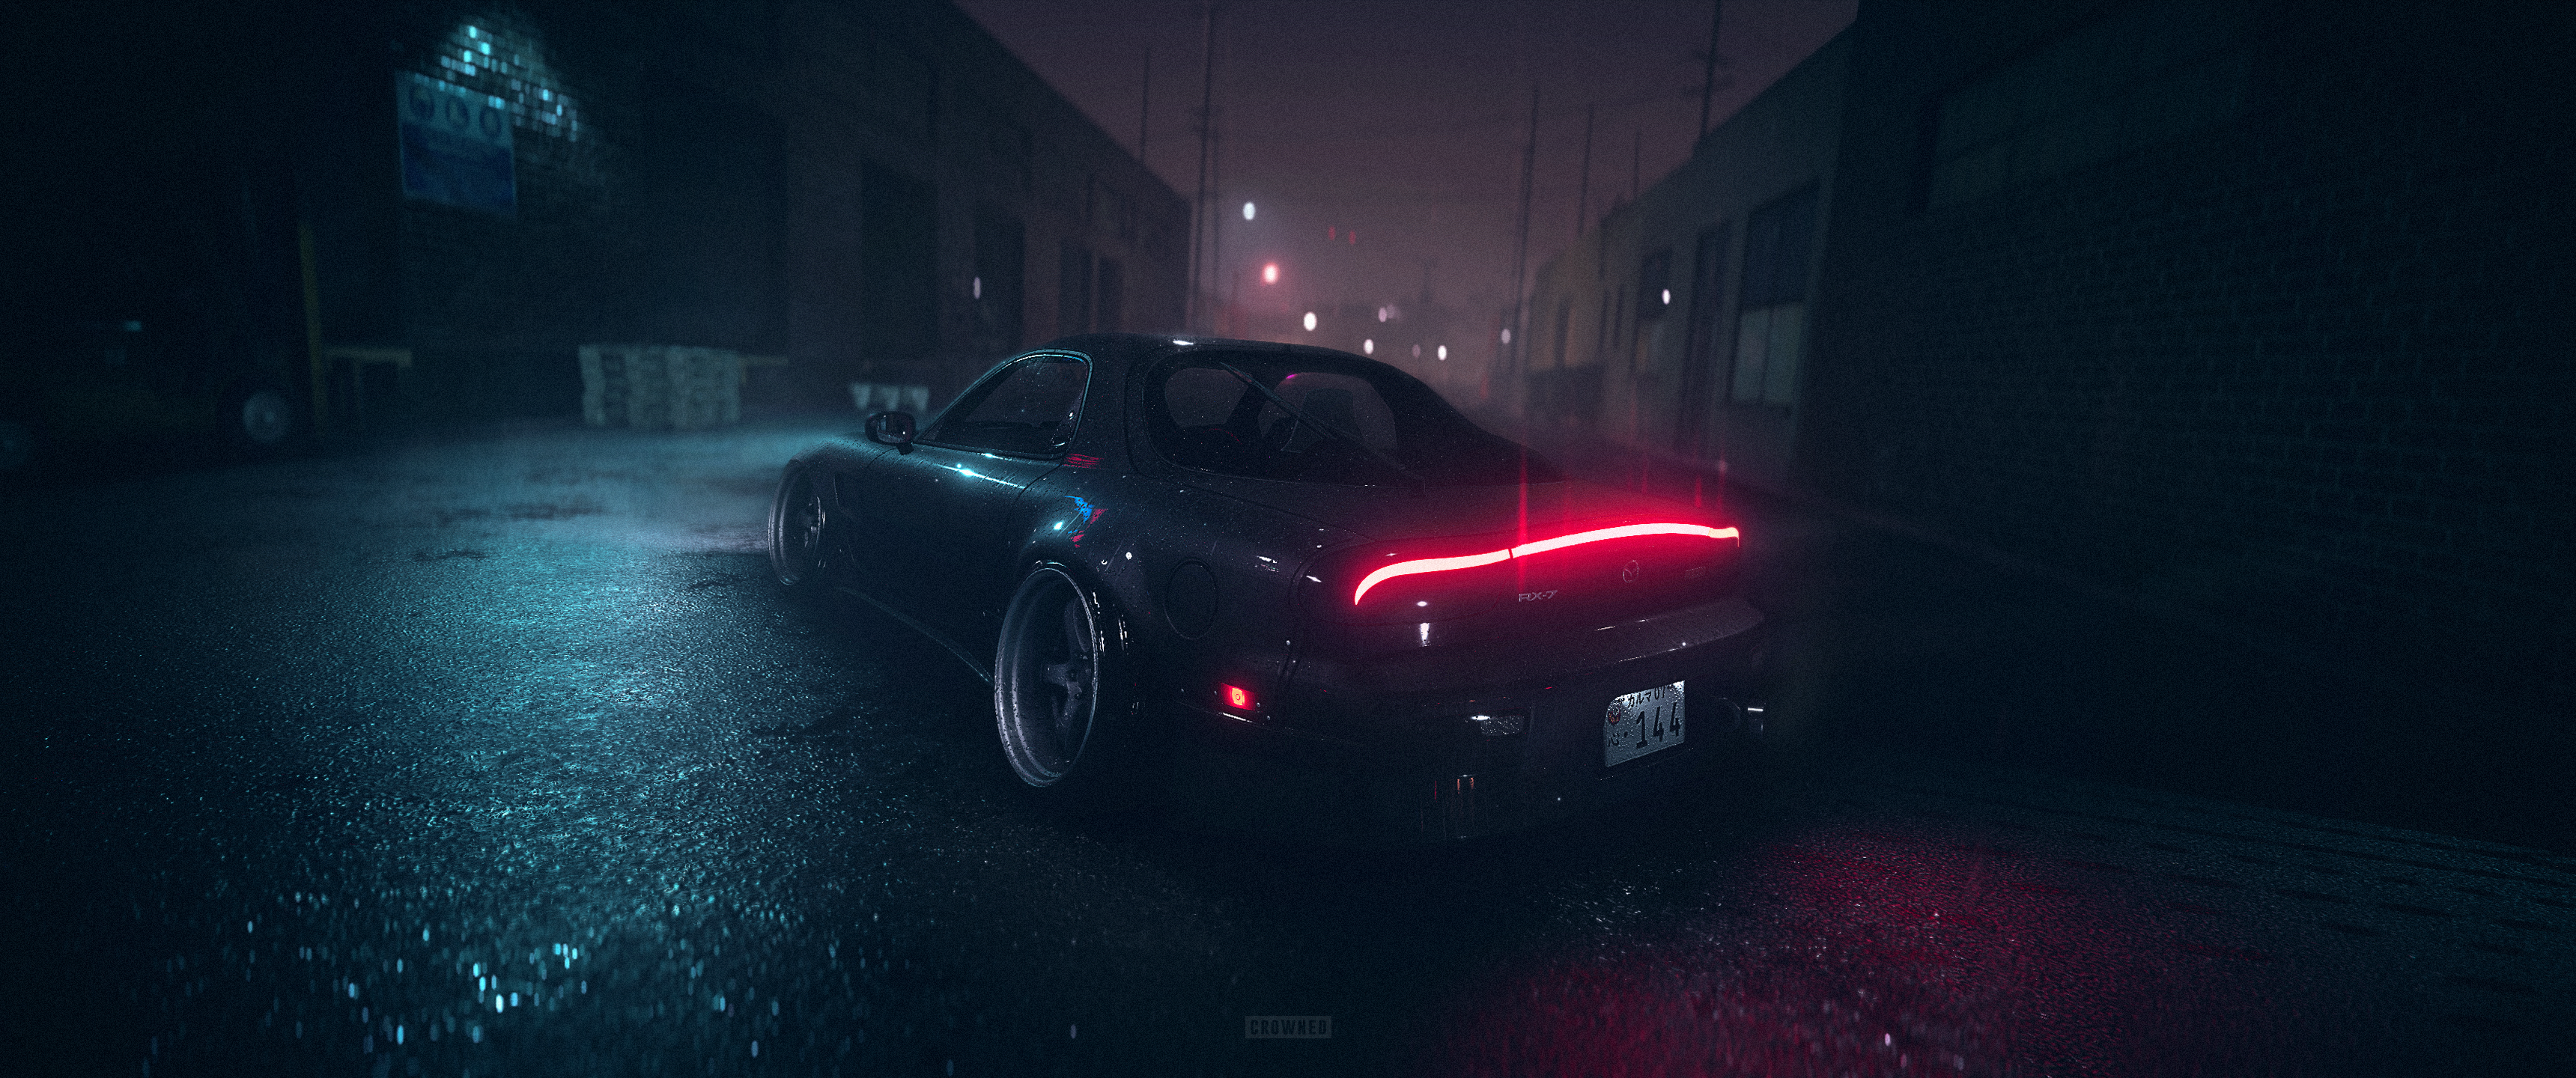 Wallpaper, NFS crowned, Need for Speed, Need For Speed car, cinematic 3440x1440